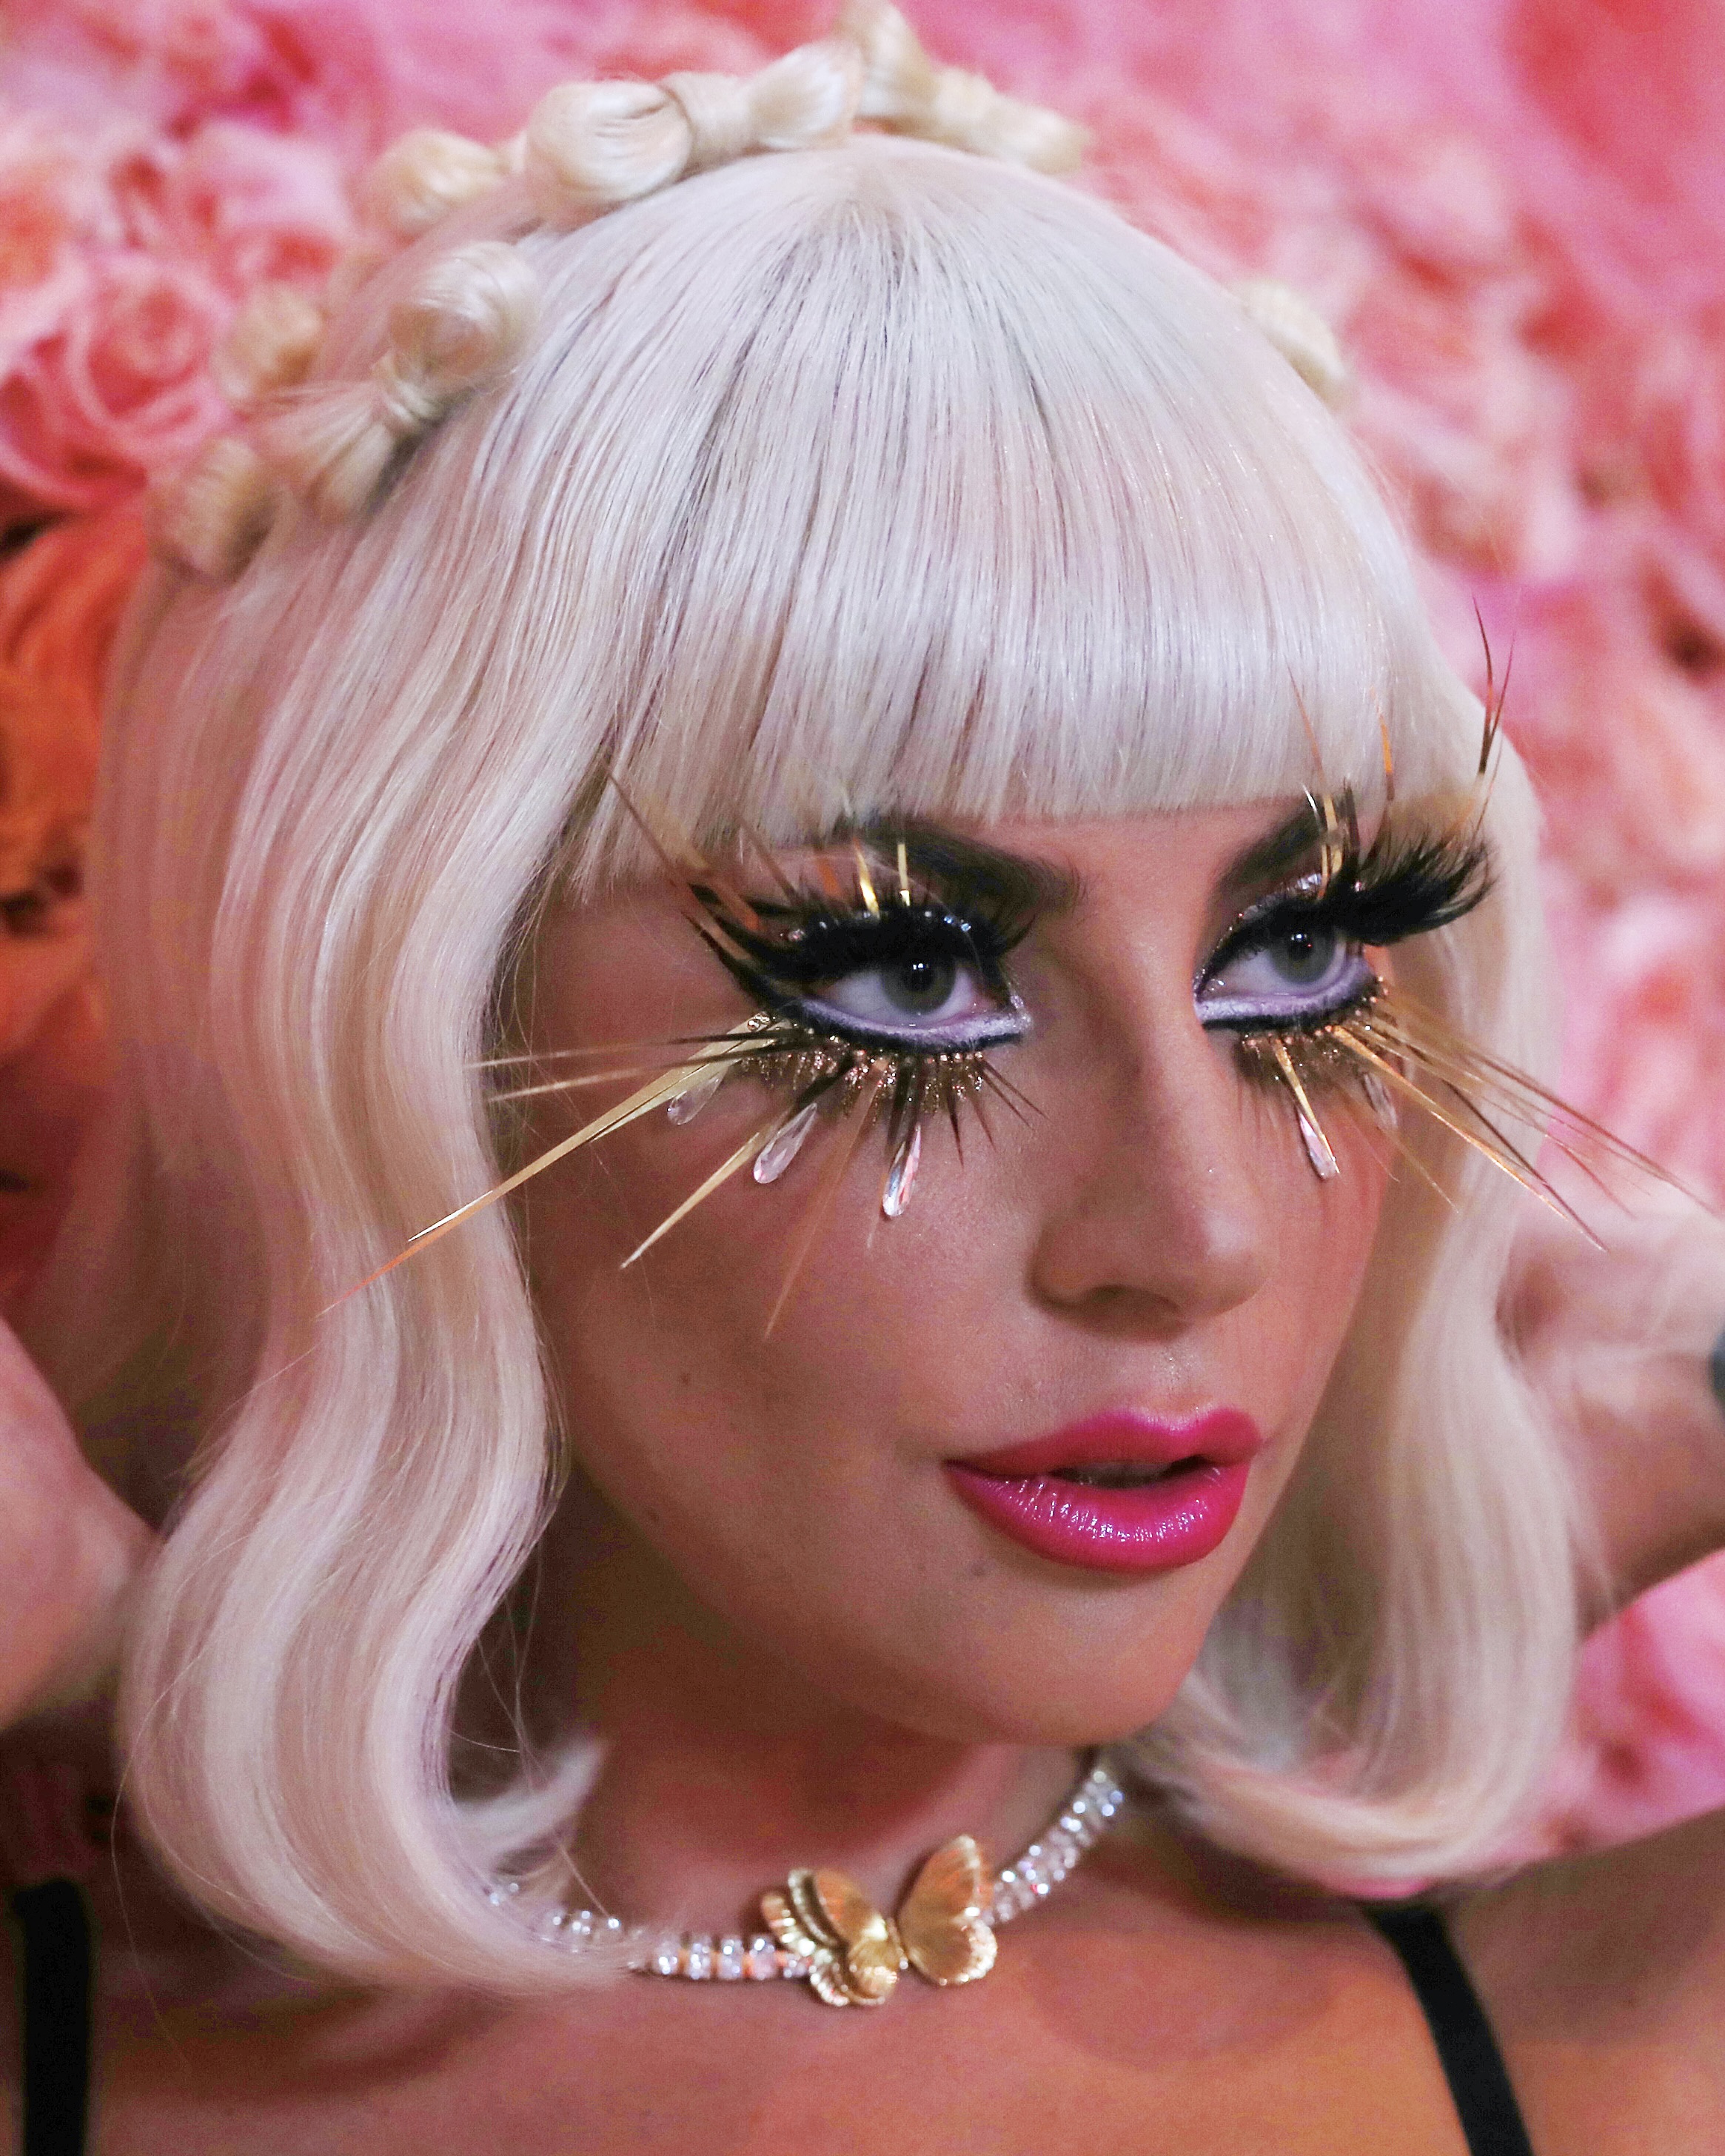 Lady Gaga shined in natural diamond jewelry at the 2019 Met Gala.